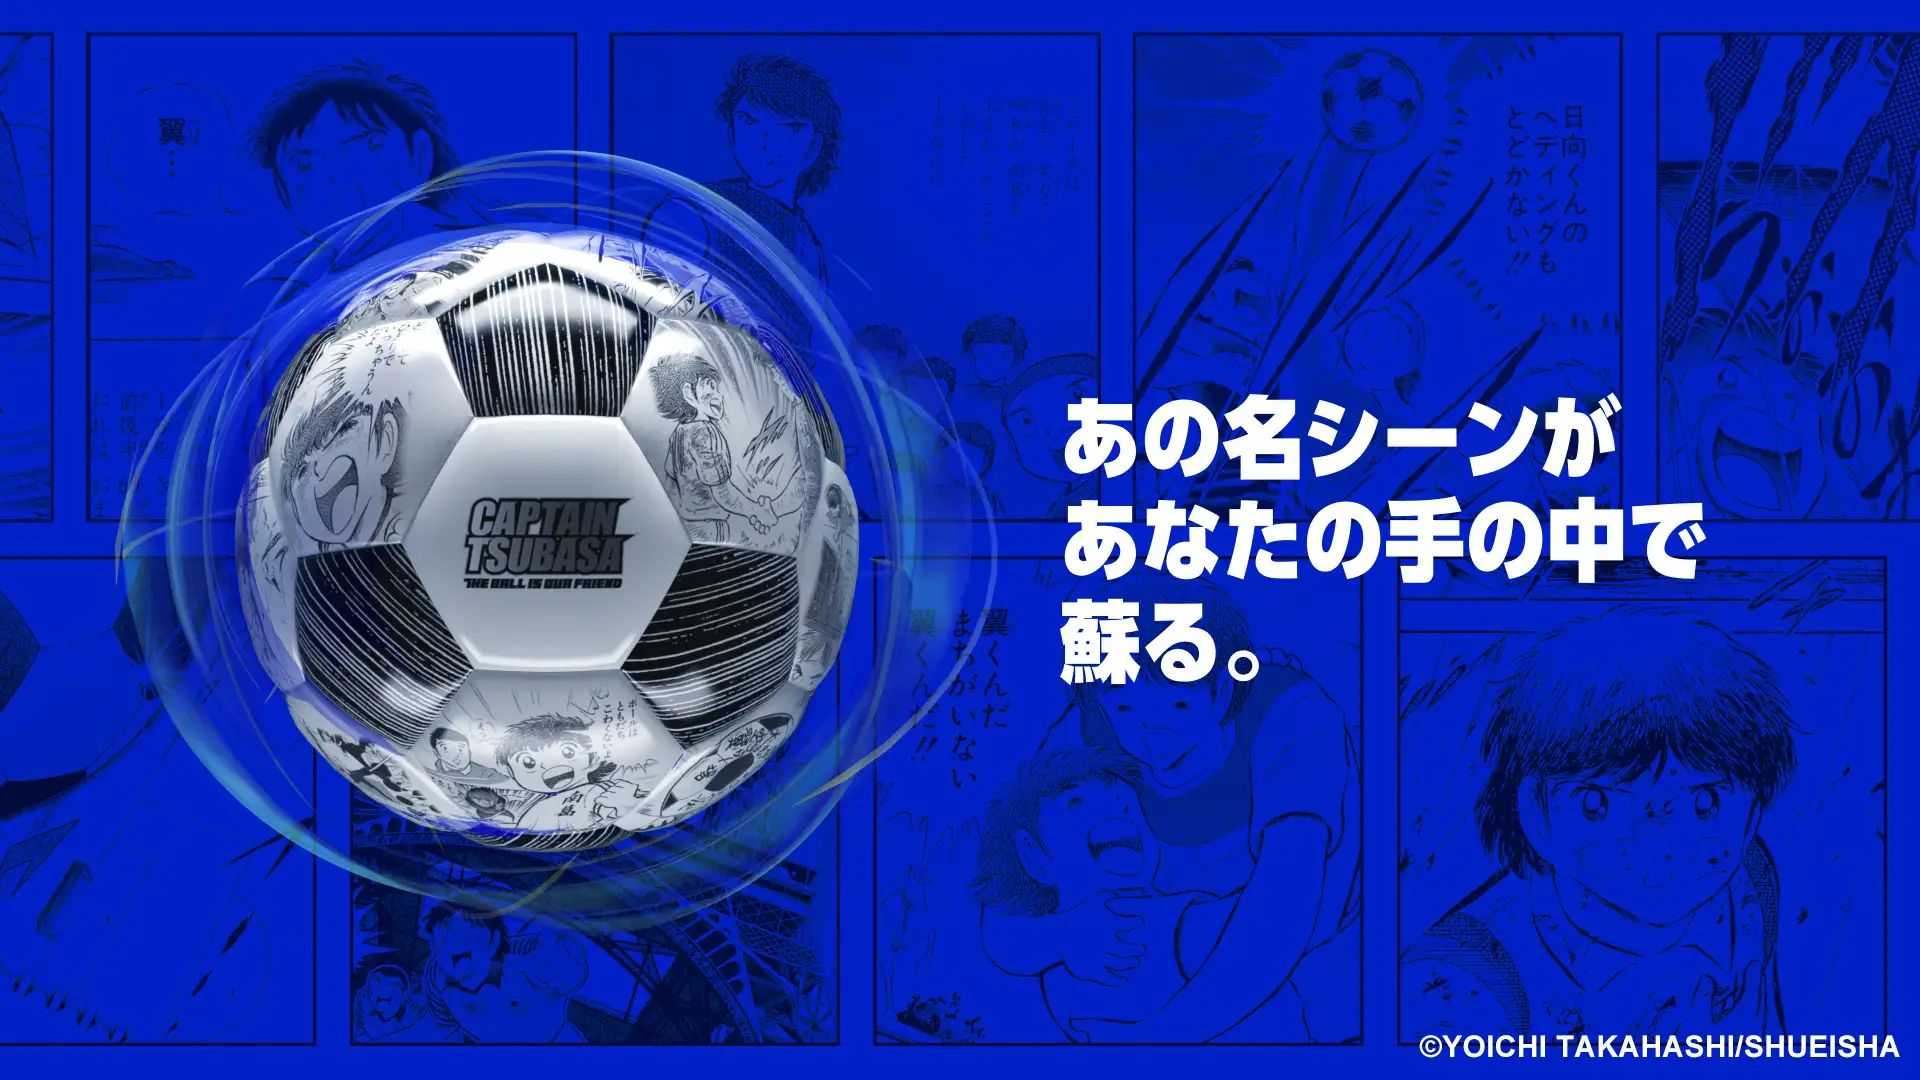 CAPTAIN TSUBASA - THE BALL IS OUR FRIEND's image